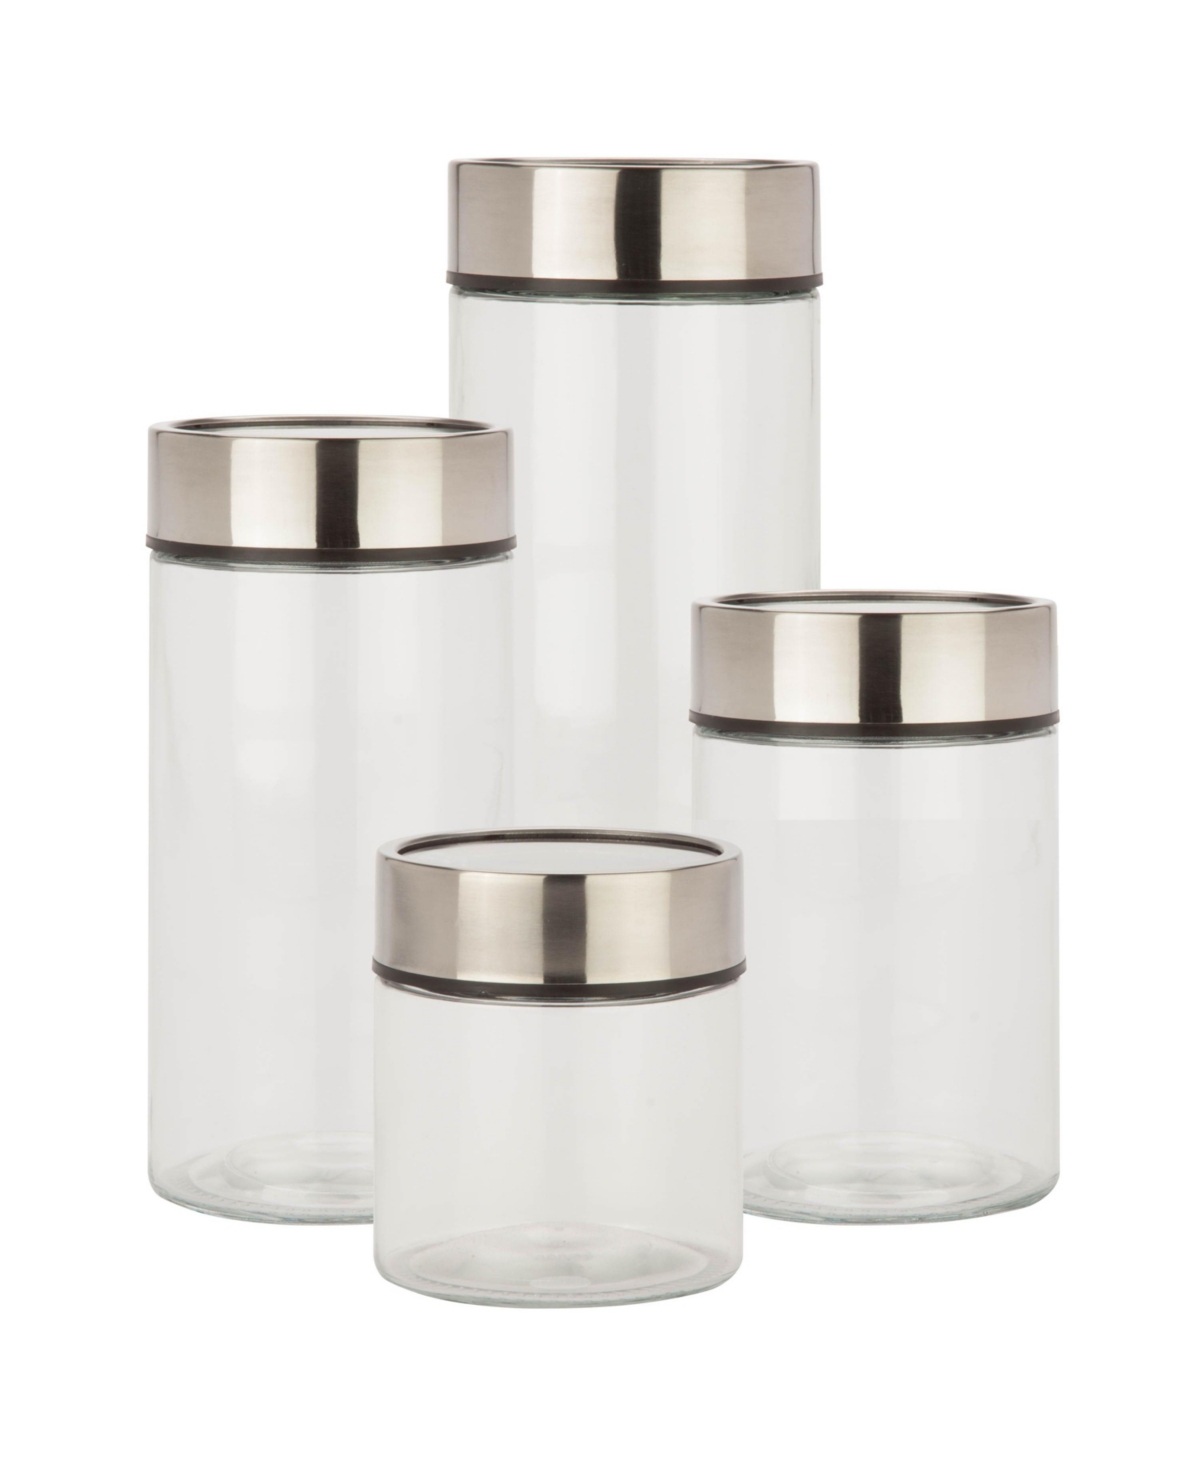 Honey Can Do Stainless Steel Lids And Fresh-date Dials Kitchen Glass Jar Set, Set Of 4 In Chrome